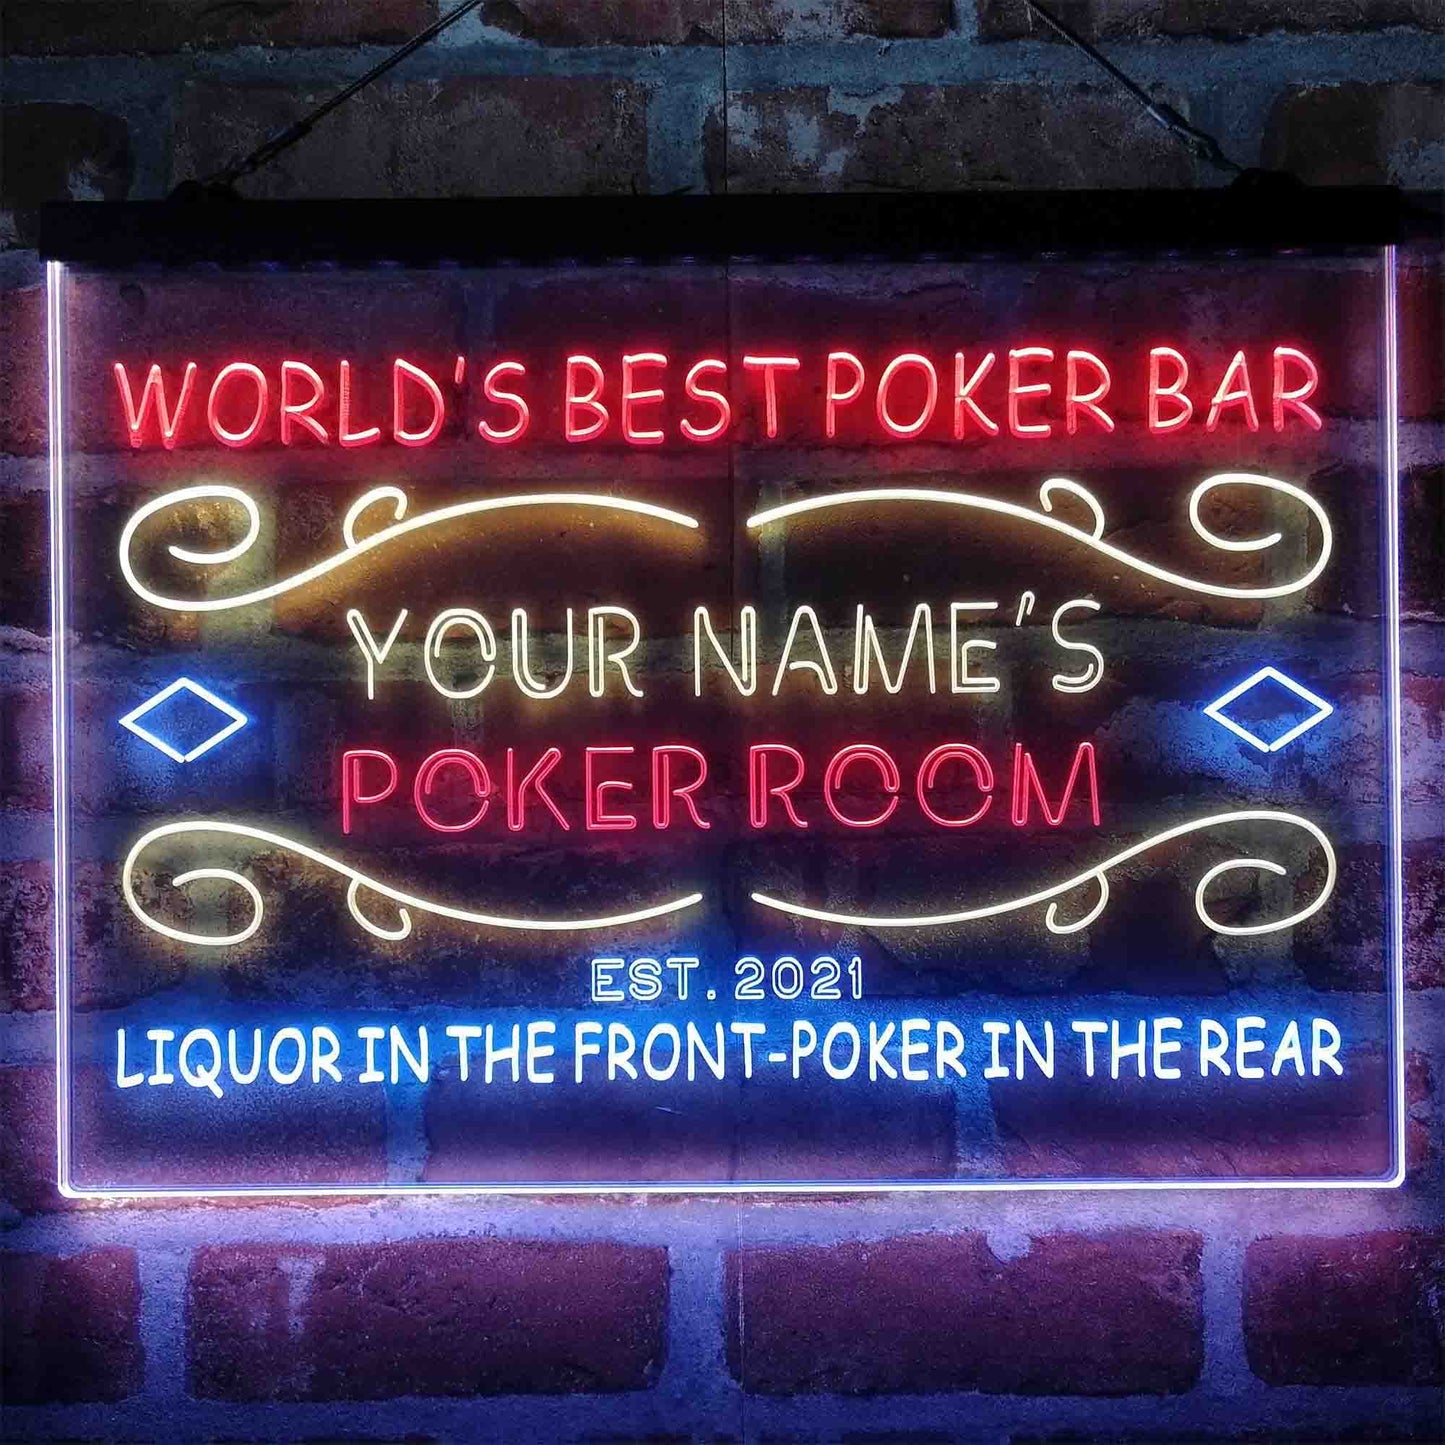 Personalized Poker Room Bar 3-Color LED Neon Light Sign - Way Up Gifts